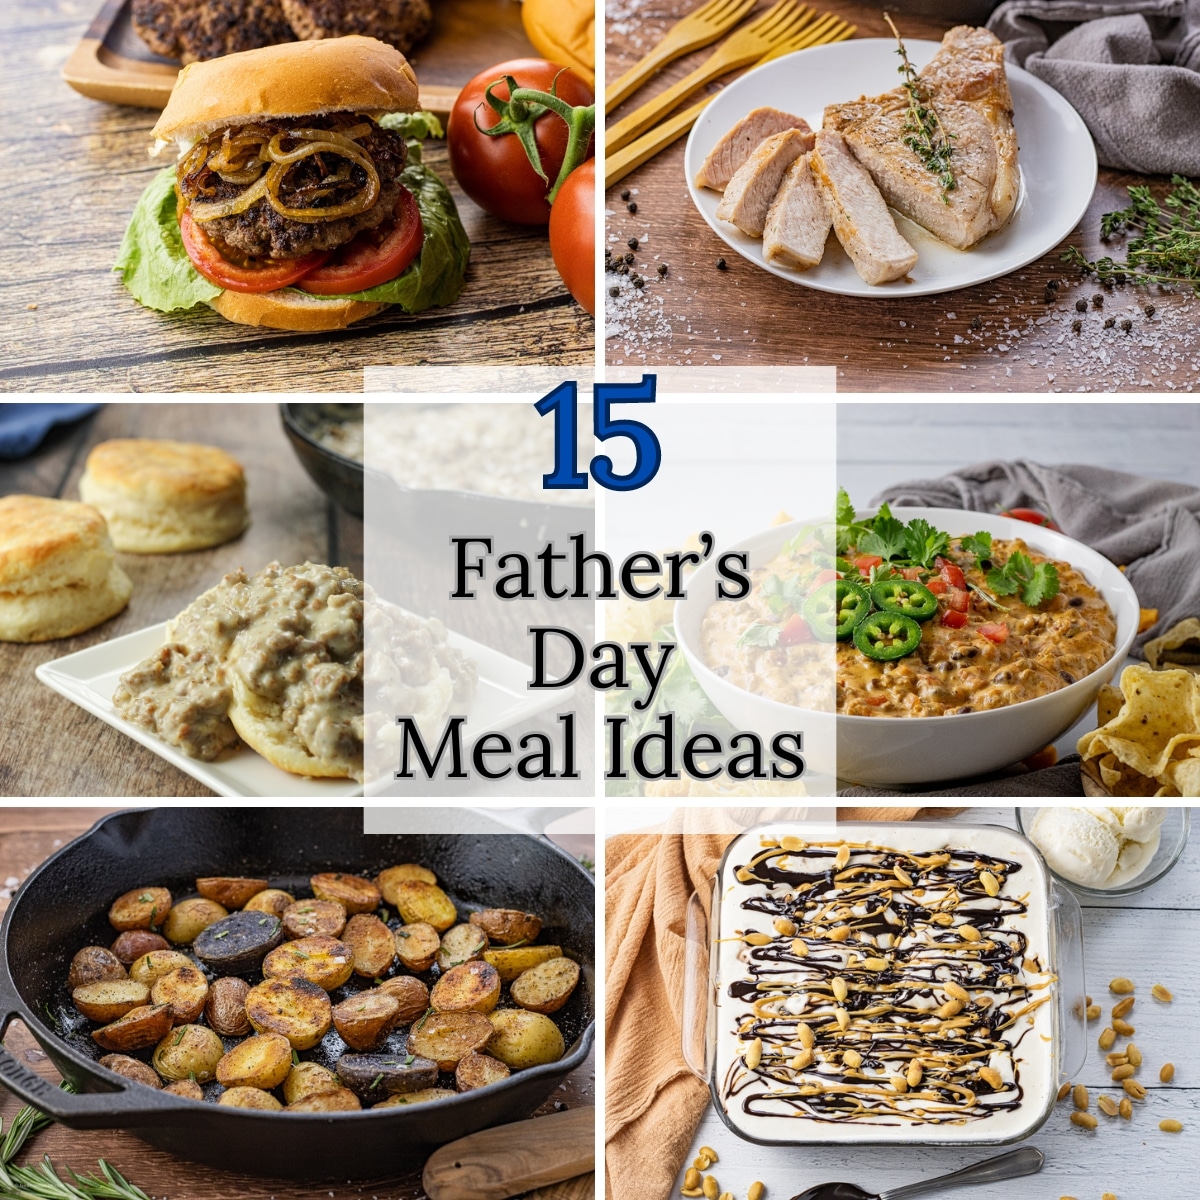 Father’s Day Meal Ideas